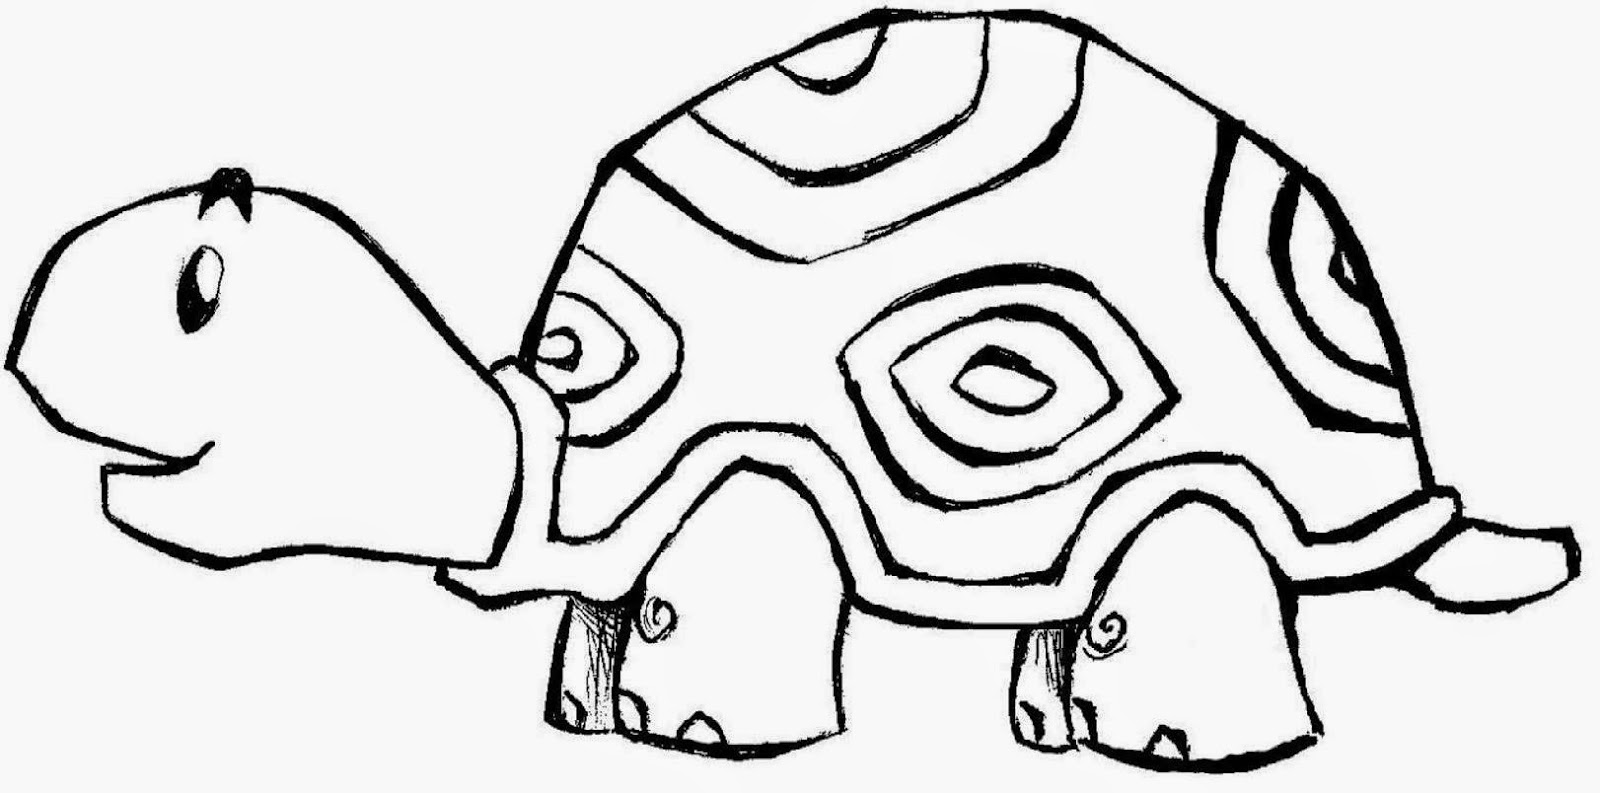 Frogs coloring pages for kids | www.ellabjenkins coloring